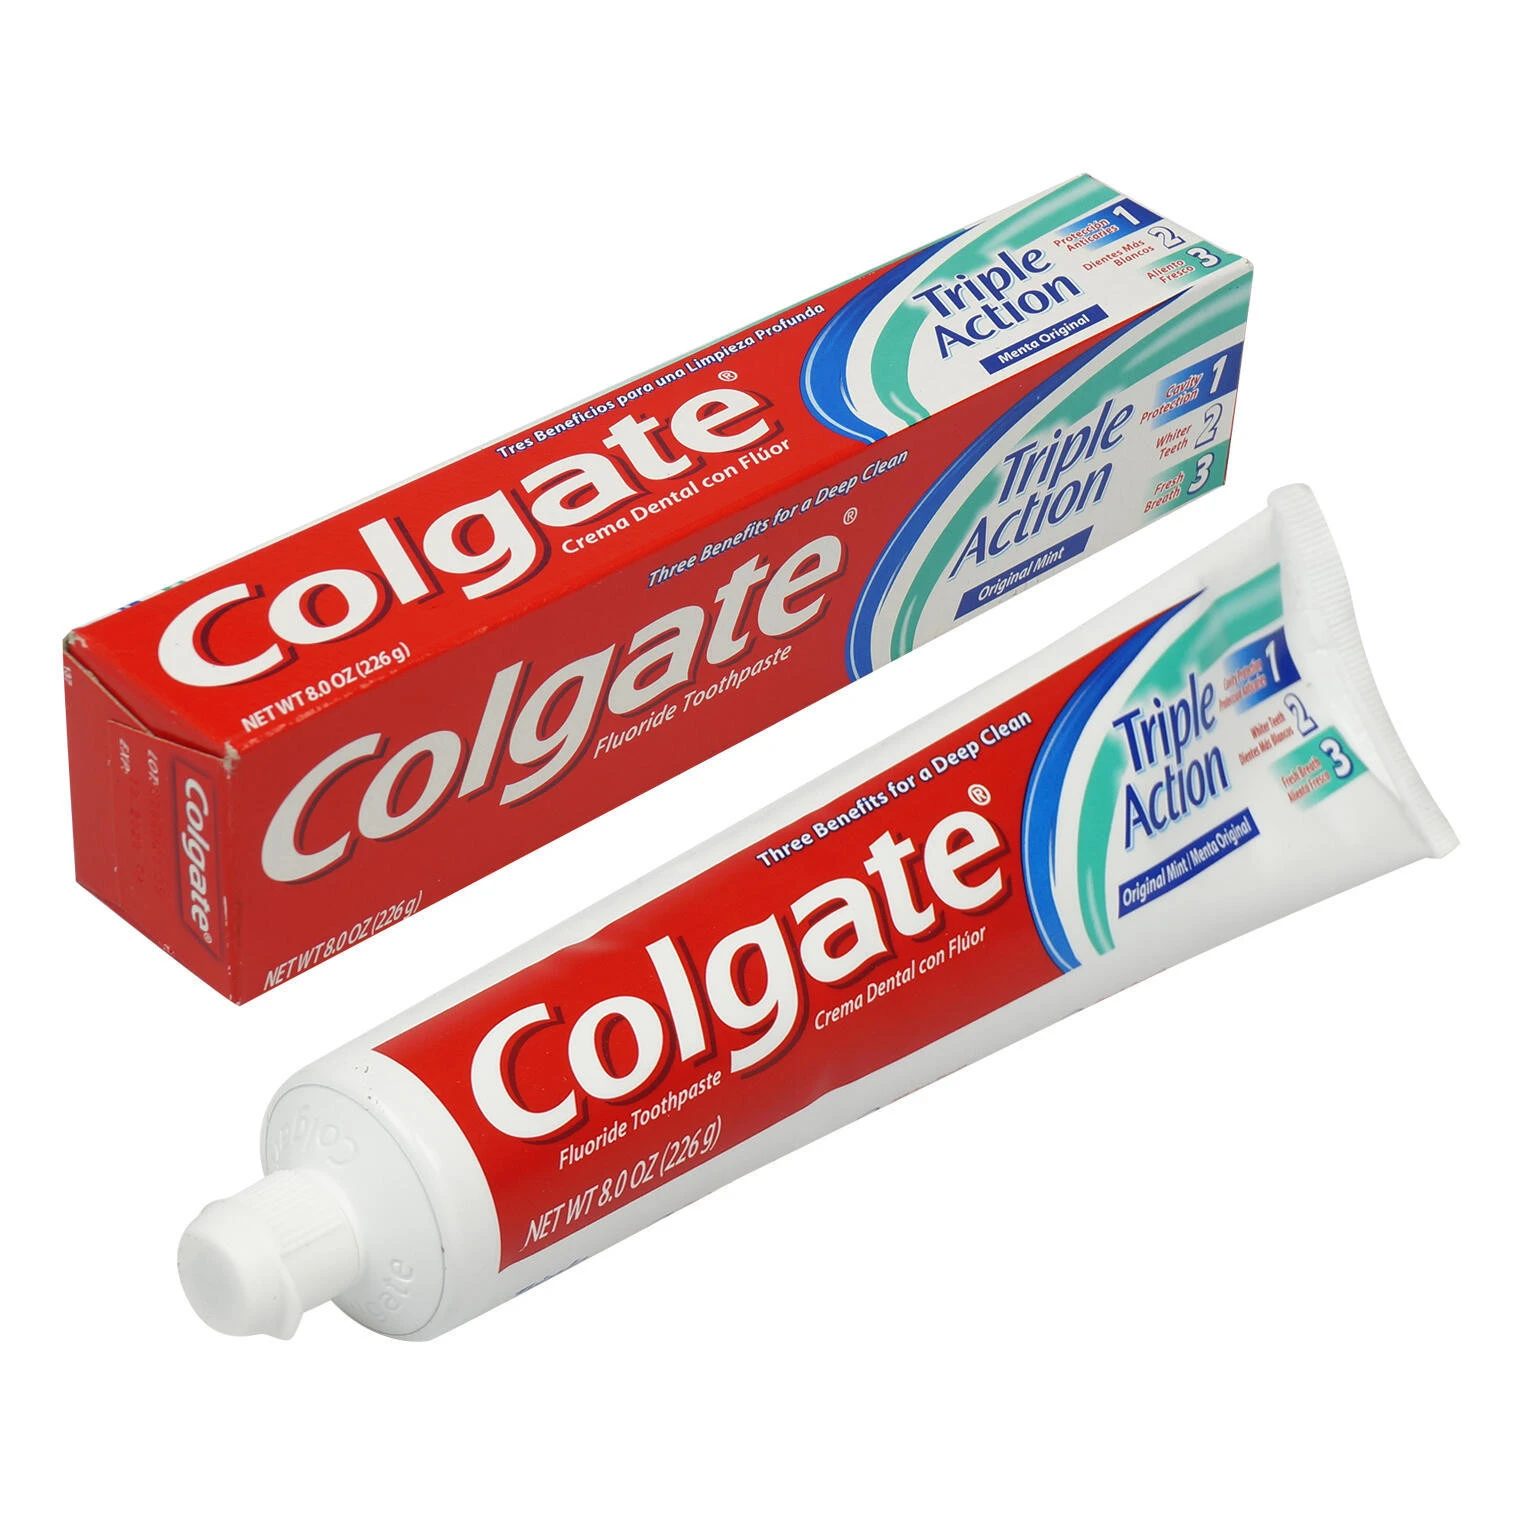 Wholesale Colgate Toothpaste For Sale